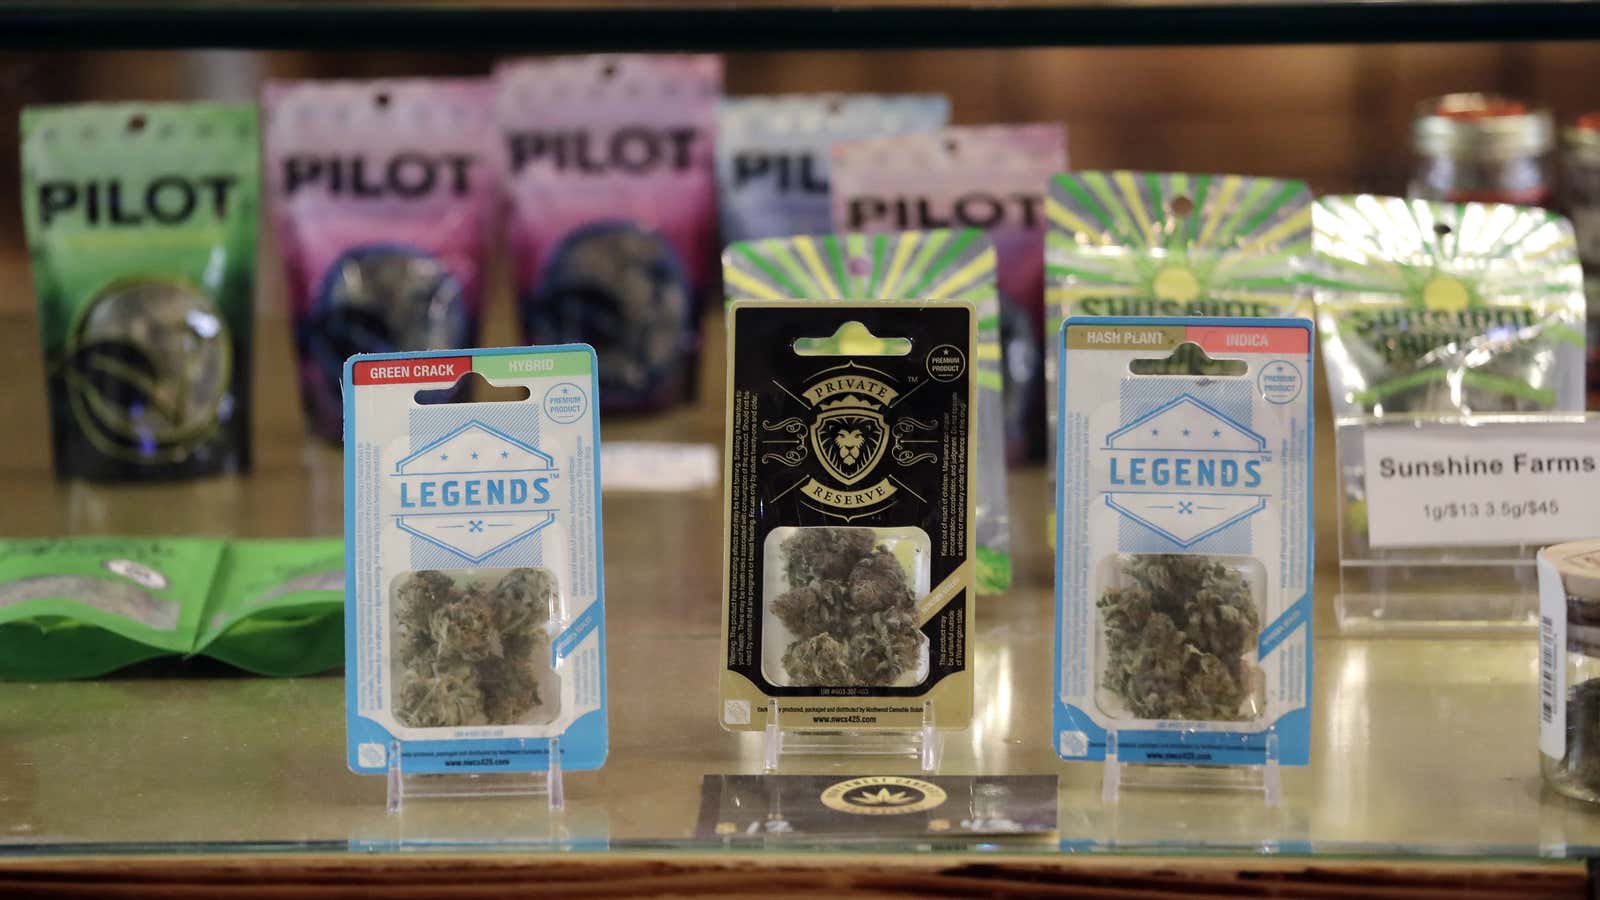 It’s unclear whether federal prosecutors will actually pursue cases, and that uncertainty leaves many dispensary owners feeling as paranoid as their customers.